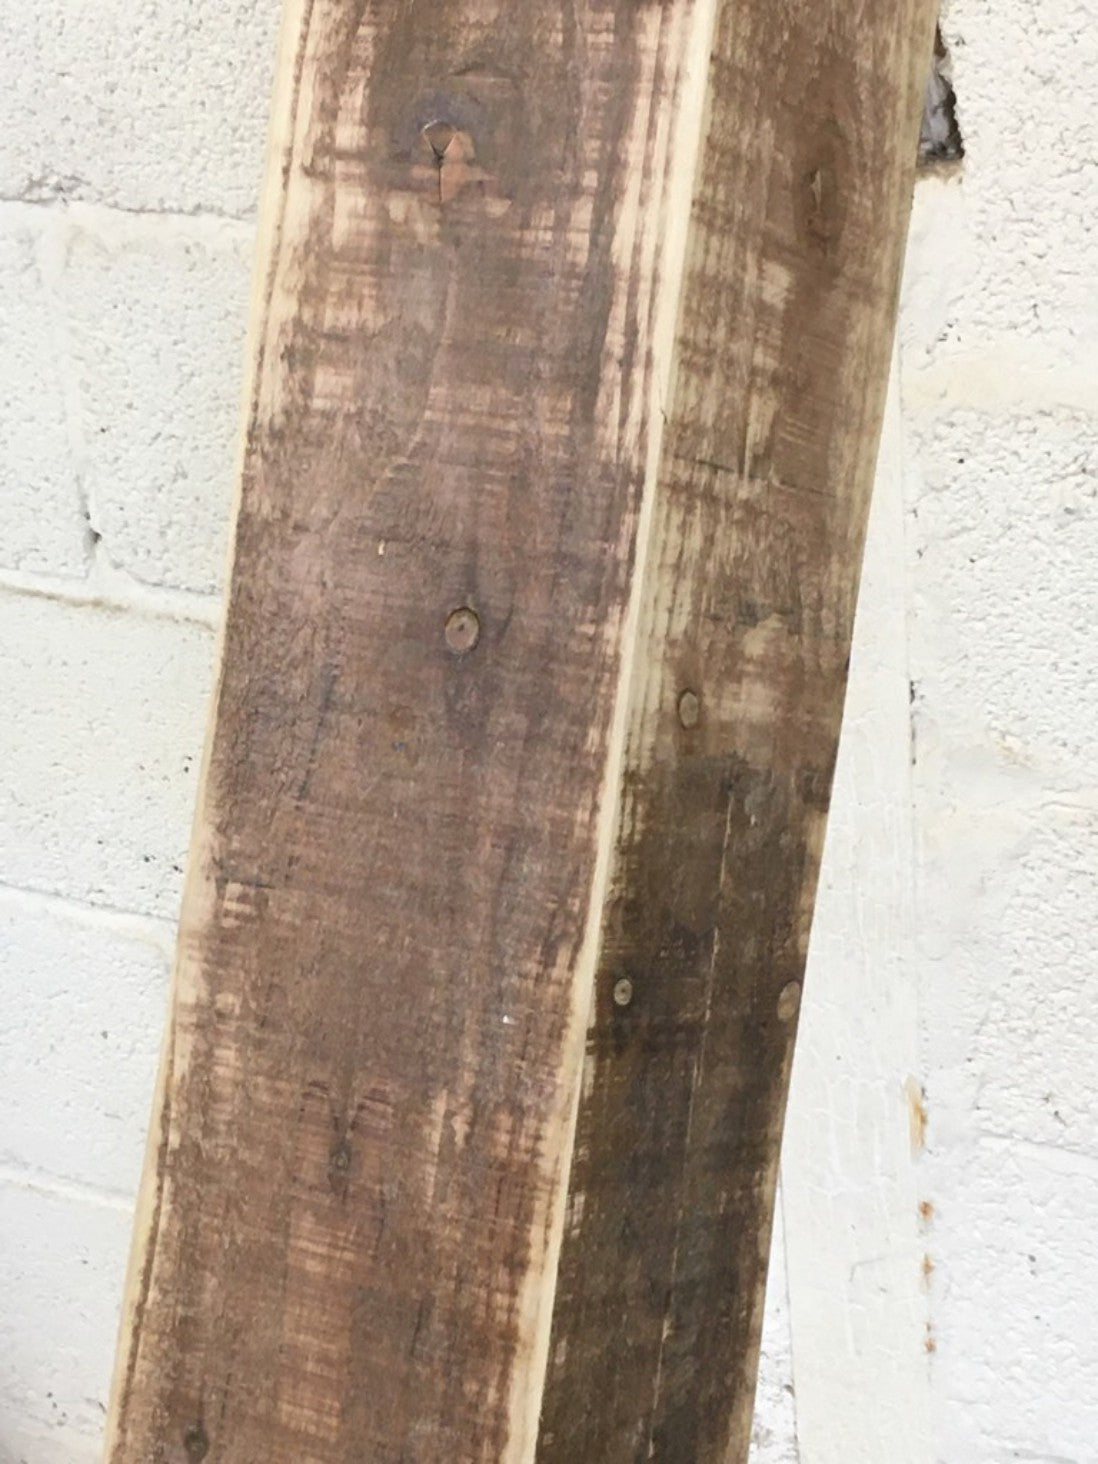 6ft 11" Or 2.11m Long 6 5/8” Deep Old Salvaged Rustic Pine Beam Post Support